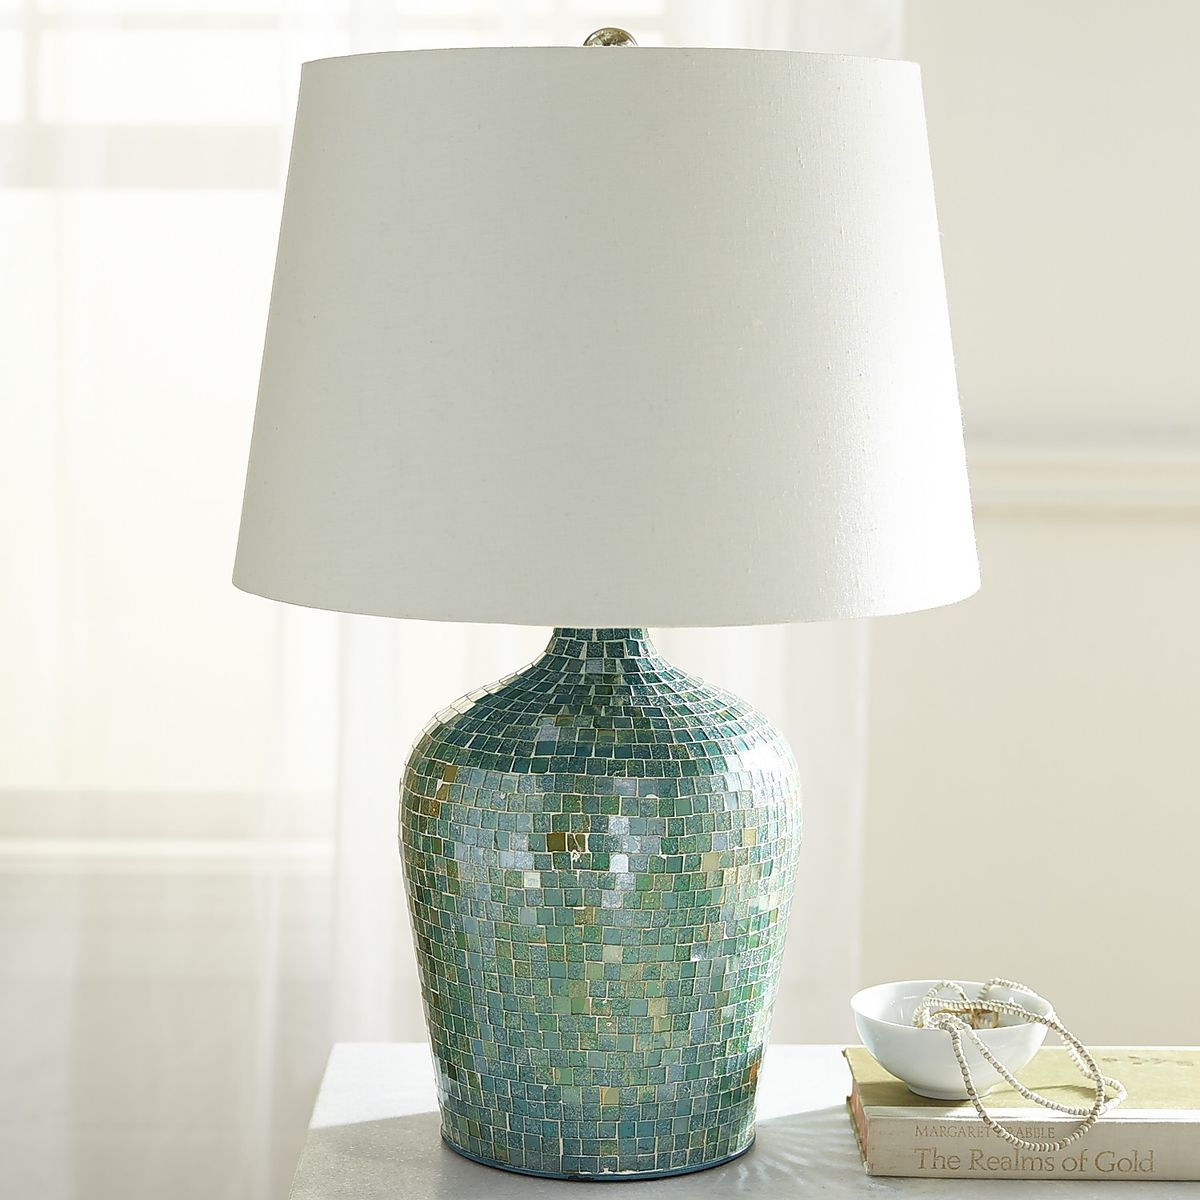 Oceans Turquoise Mosaic Table Lamp Pier 1 Imports within size 1200 X 1200